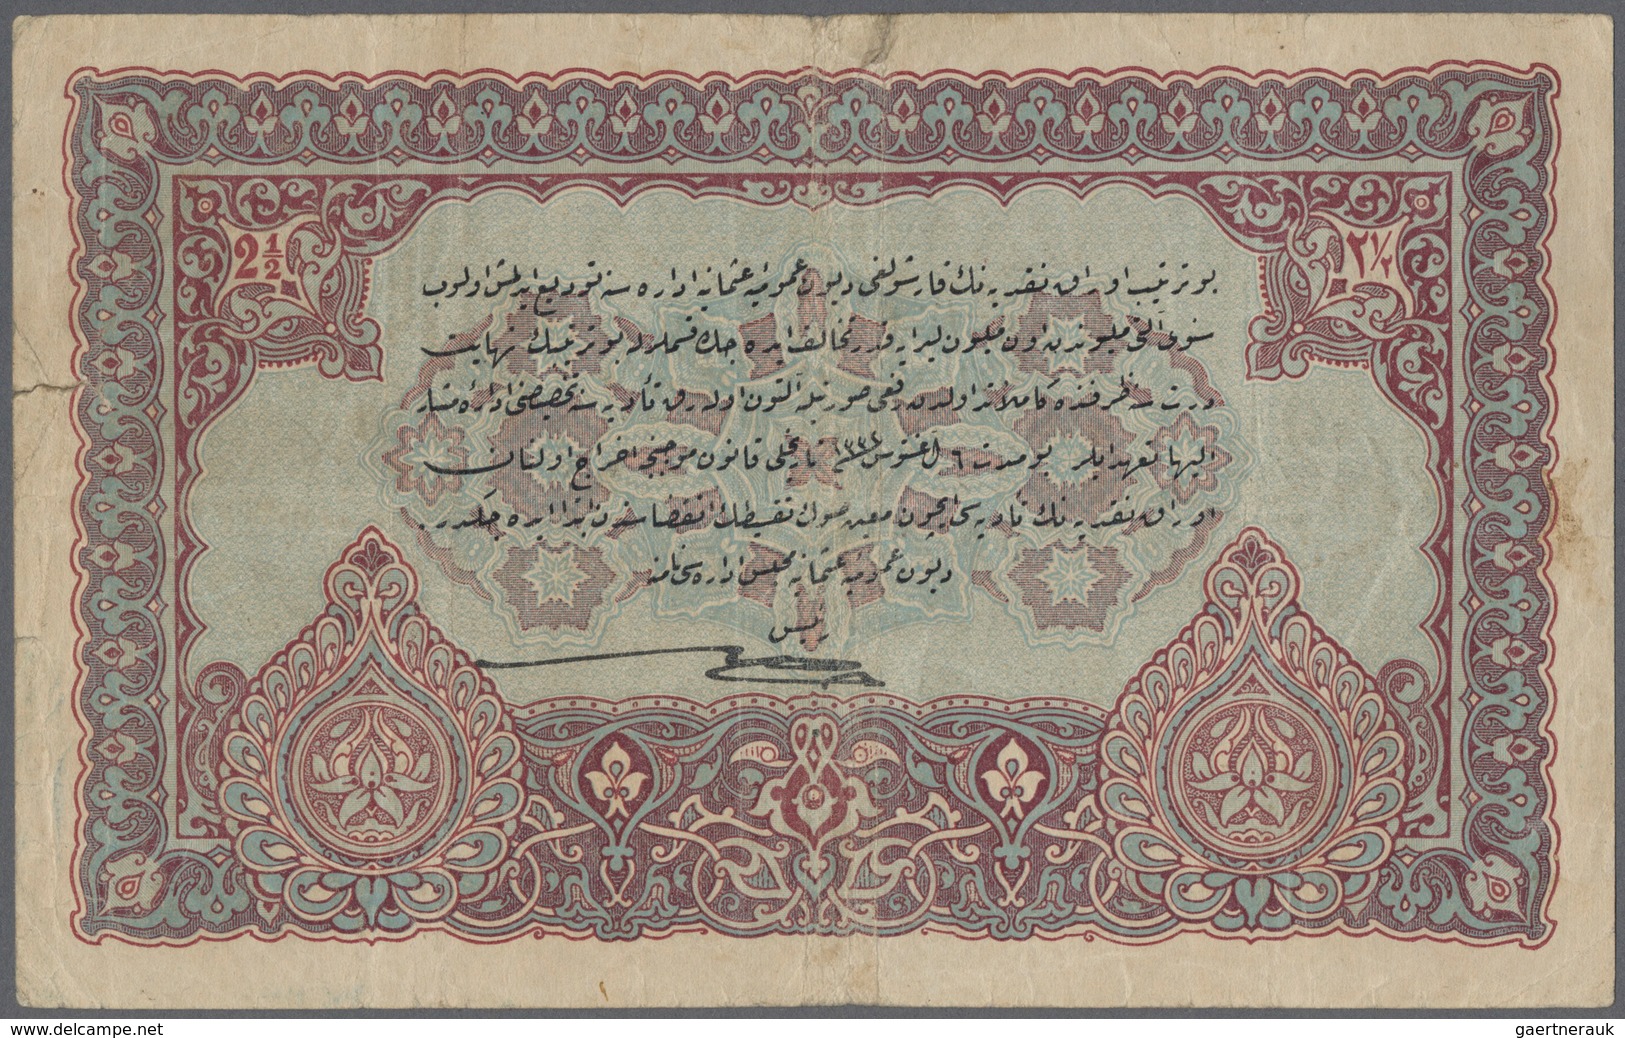 02521 Turkey / Türkei: 2 1/2 Livres 1917 P. 100, Foldede Several Times, Some Border Tears Which Are Fixed - Turkey